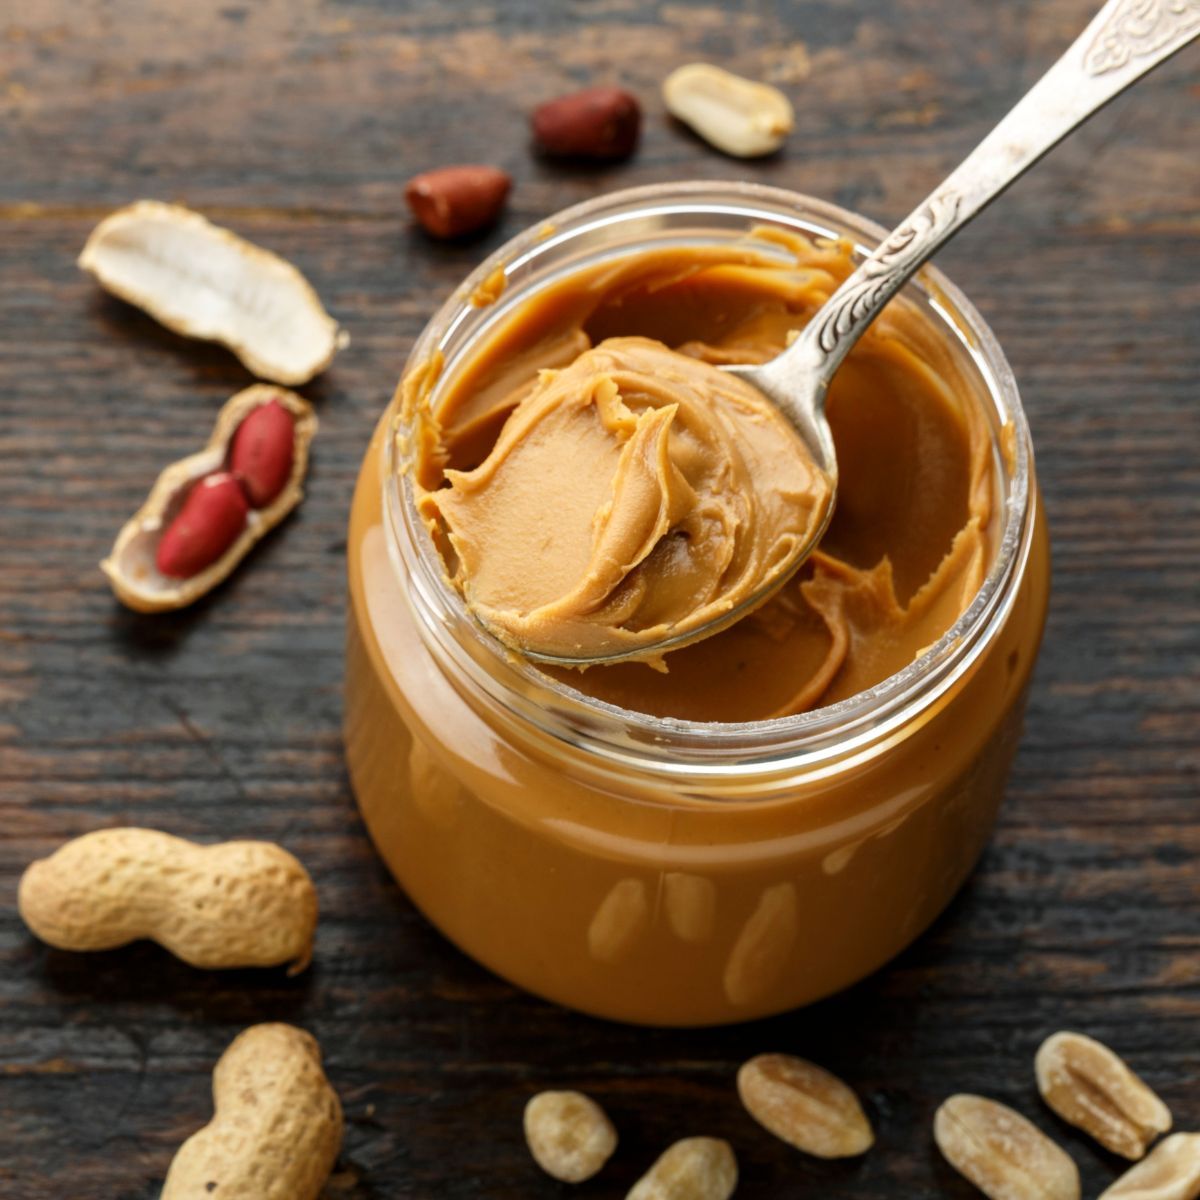 How Many Peanuts Will You Find in a Jar of Peanut Butter